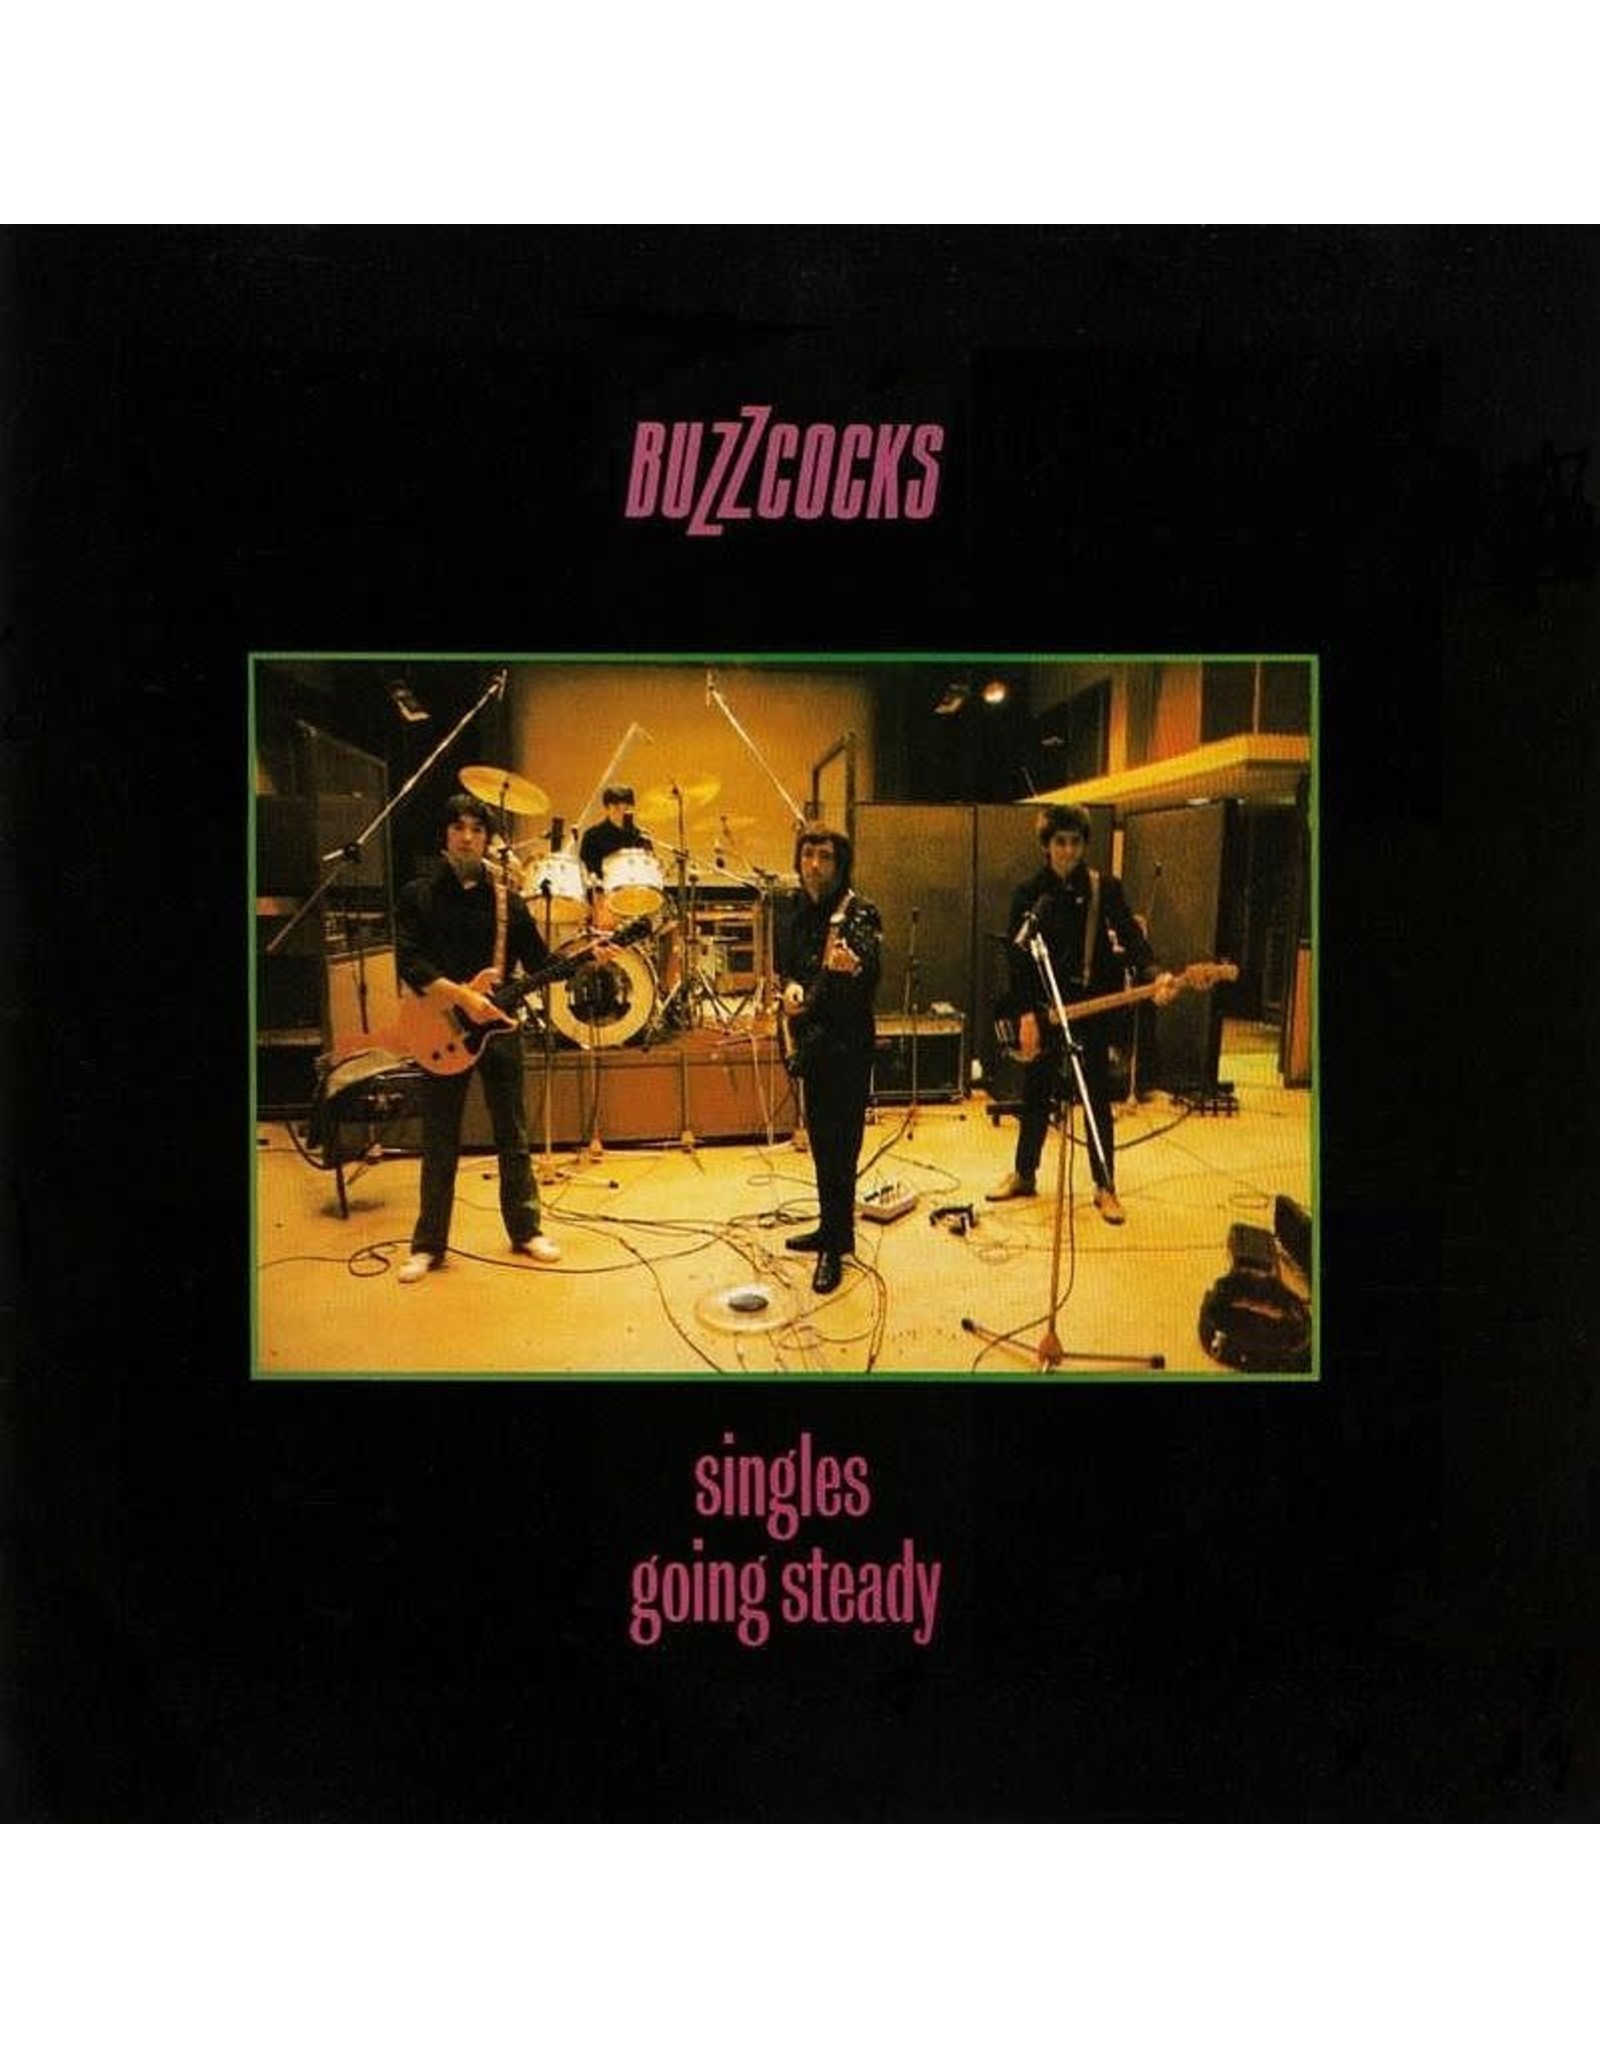 Buzzcocks - Singles Going Steady (2019 Remaster)